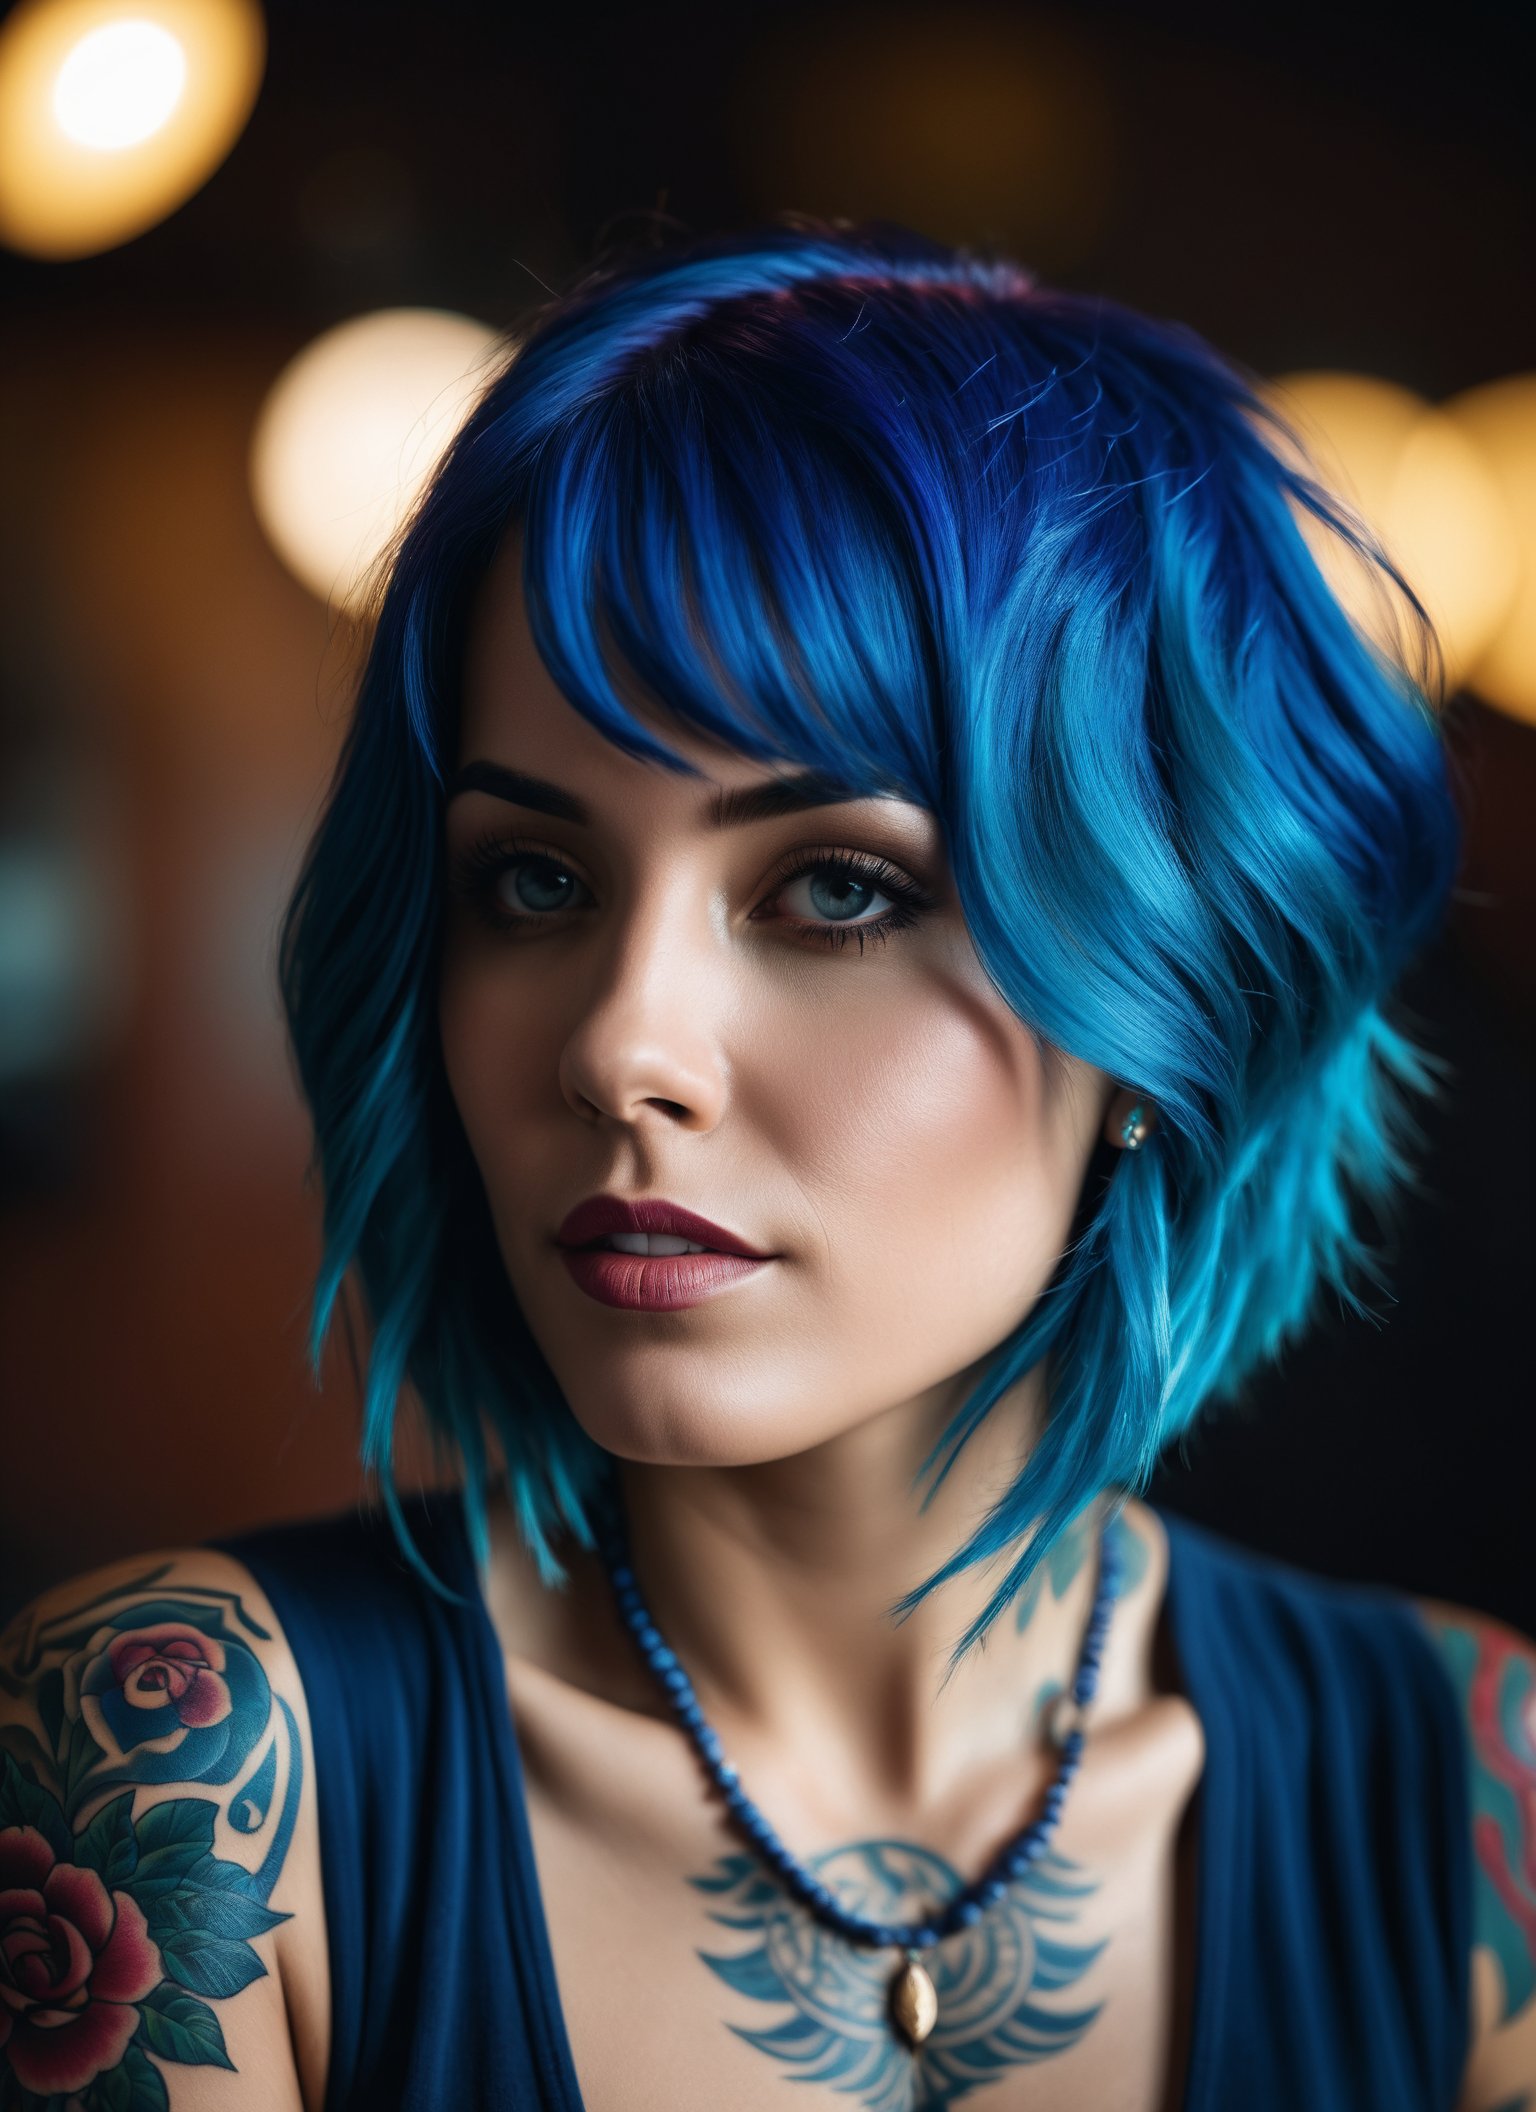 cinematic still Medium format photorealistic highly detailed 8k photography, (Woman with vibrant blue hair and intricate body artwork:1.2), Balanced perspective, Expressive tattoos, Rich colors, (Personal narratives showcased:1.3), Creative expression, Individualistic storytelling, (Unique portrayal:1.3), Detailed visual storytelling, Artistic vibrancy . emotional, harmonious, vignette, highly detailed, high budget, bokeh, cinemascope, moody, epic, gorgeous, film grain, grainy